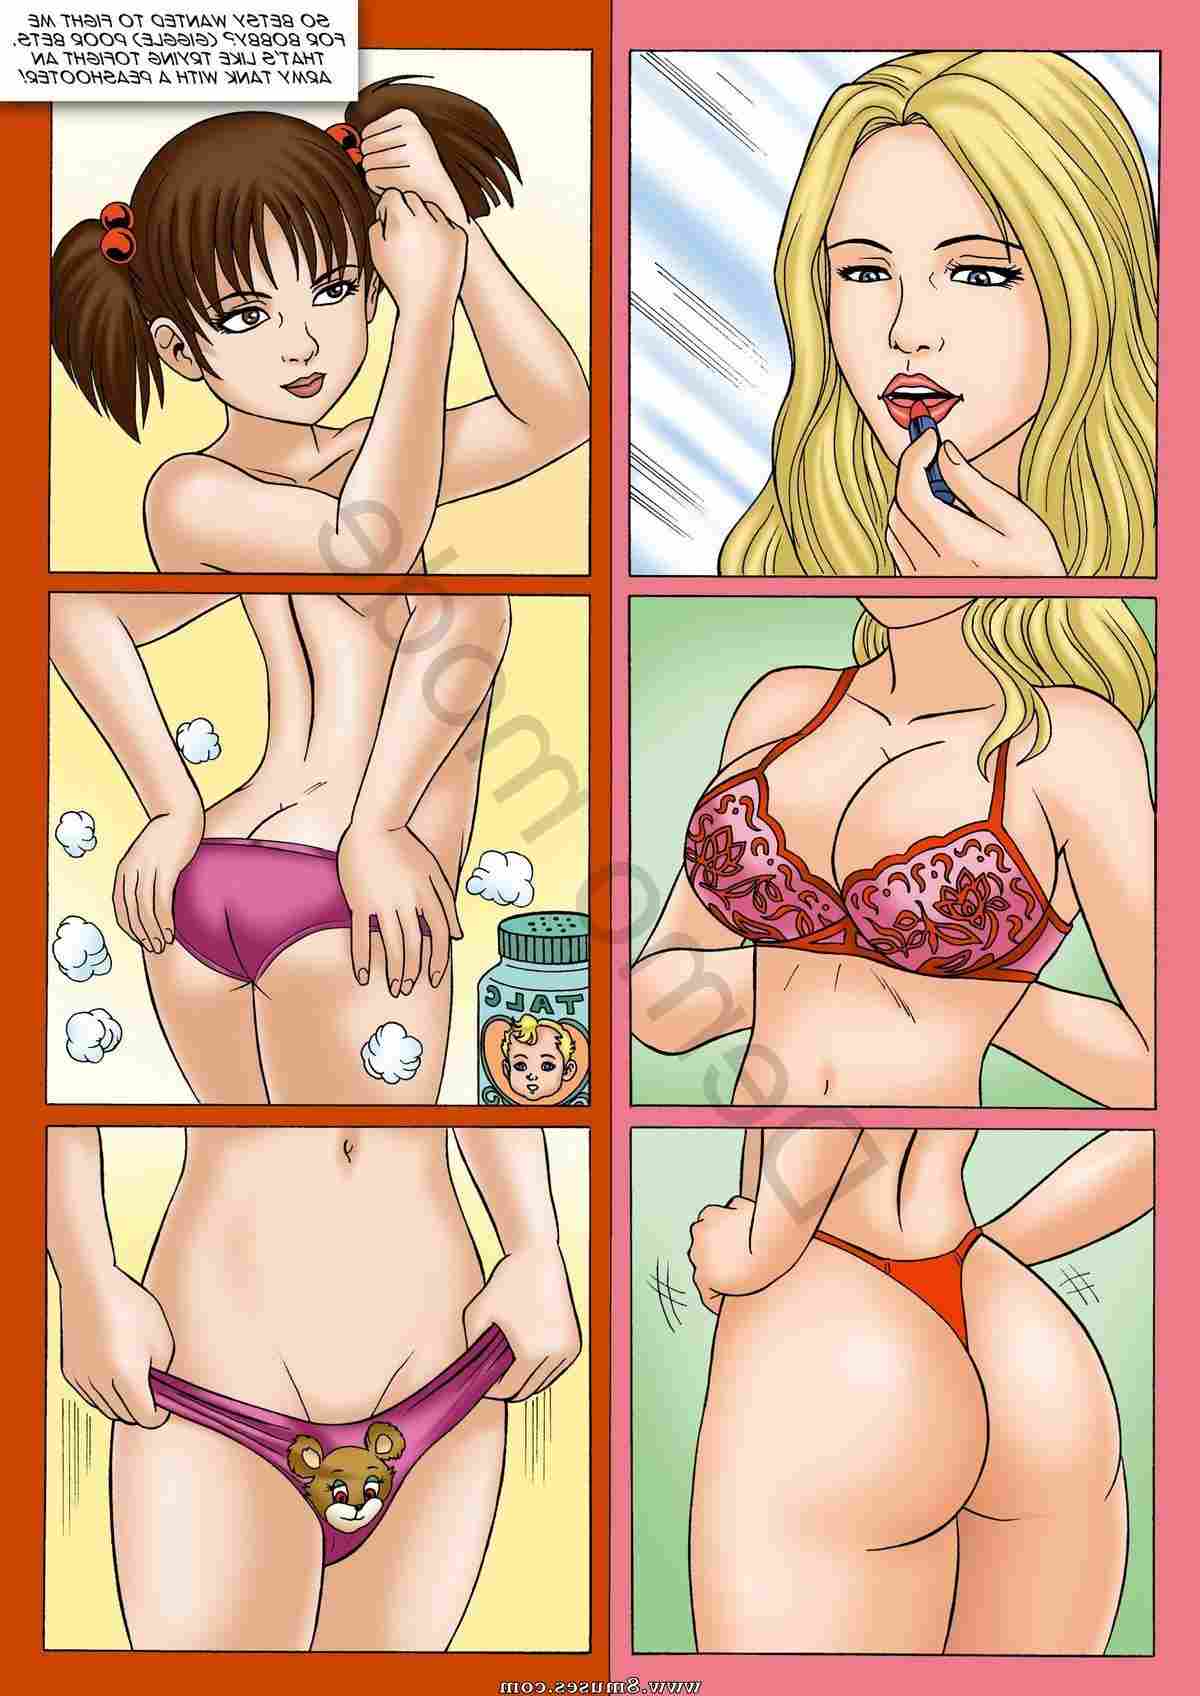 DreamTales-Comics/A-Tale-of-Two-Sisters A_Tale_of_Two_Sisters__8muses_-_Sex_and_Porn_Comics_12.jpg